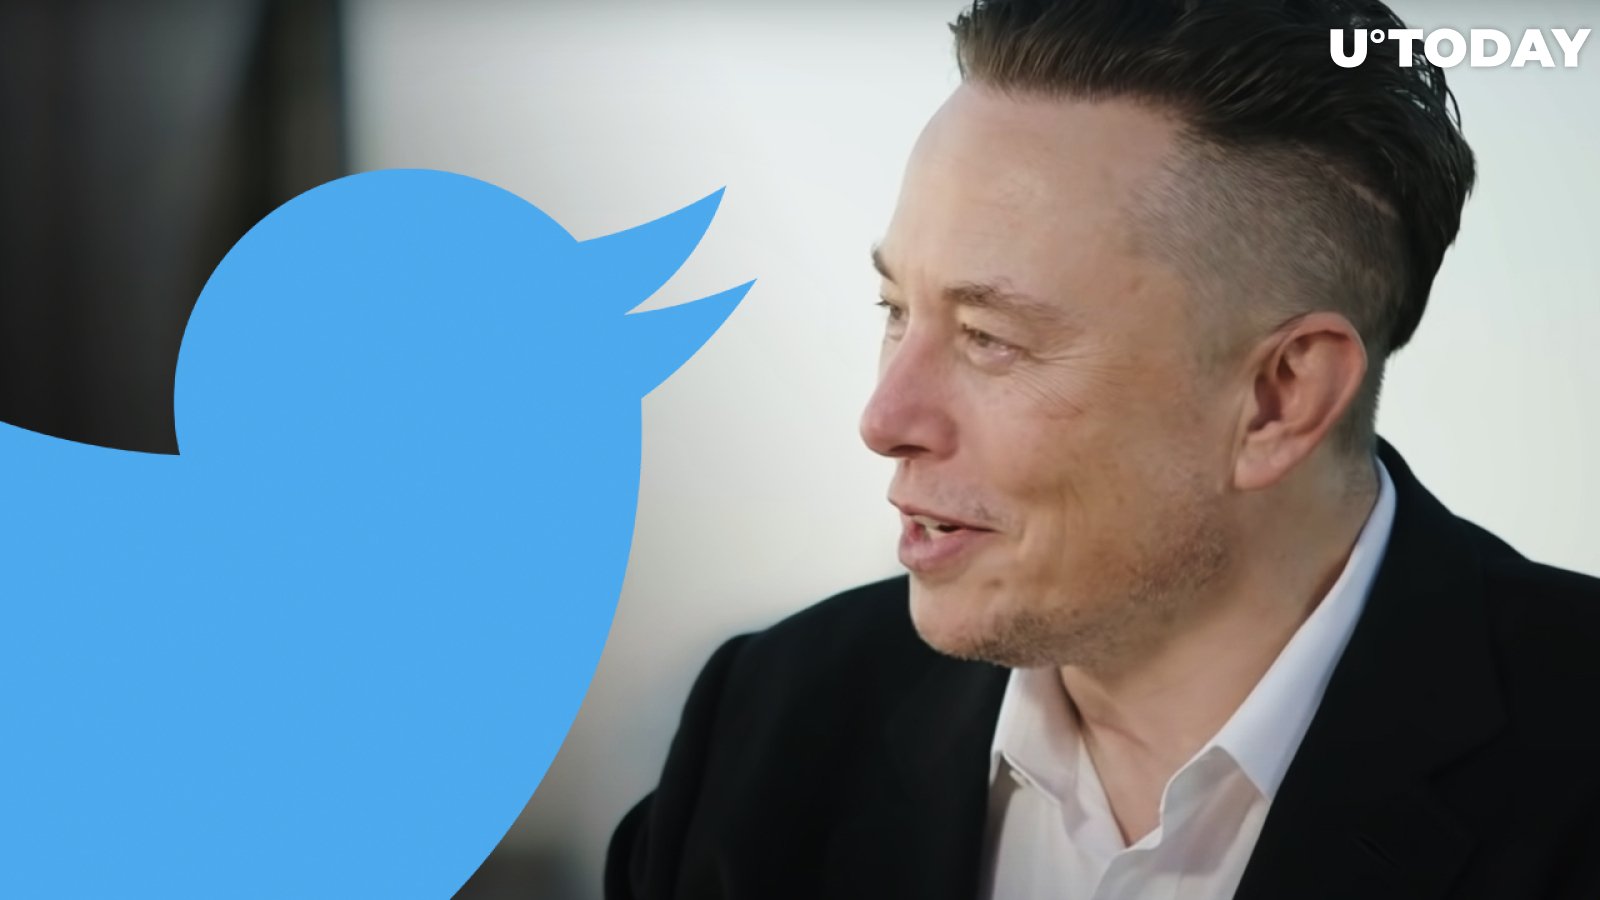 Elon Musk Posts Hilarious Meme About Web3 and Ethereum